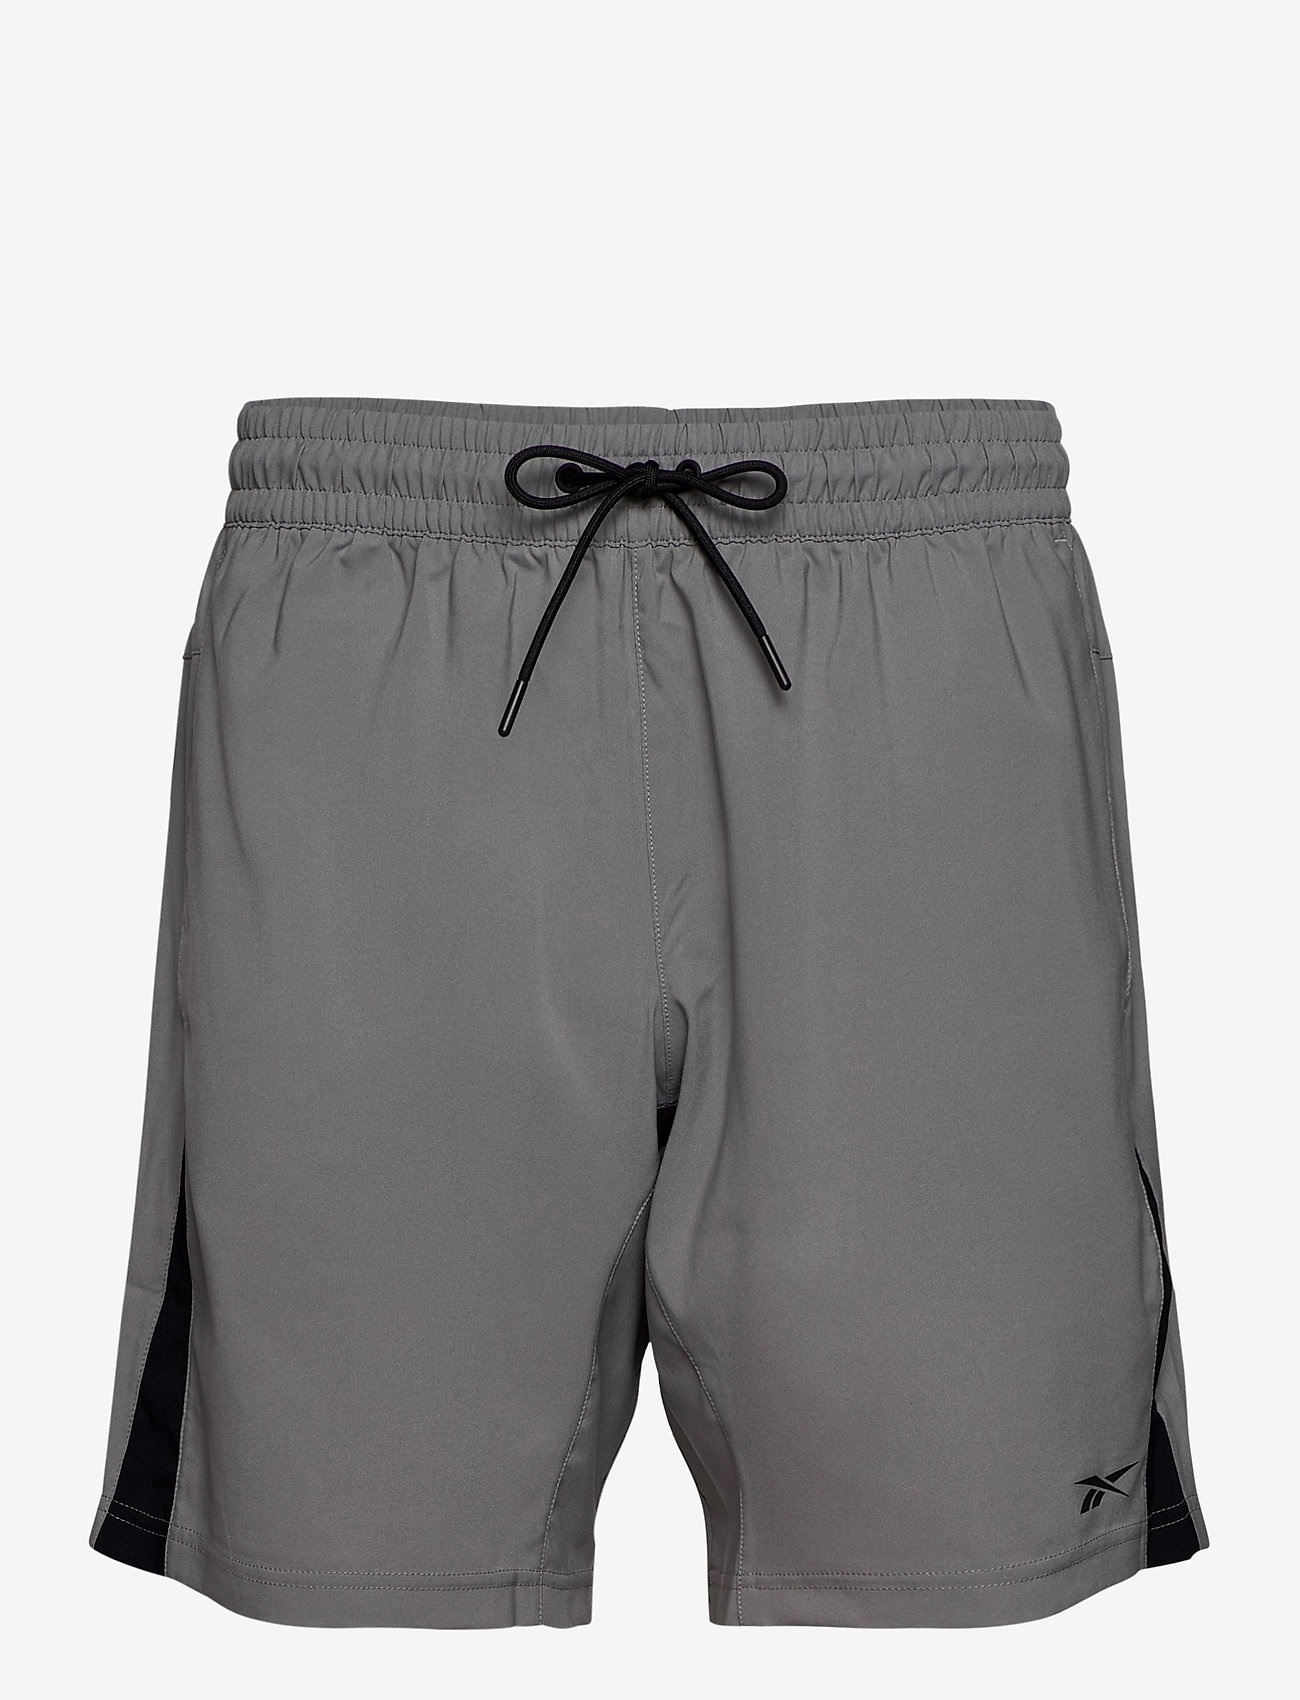 Wor Woven Short (Gragry) (27.95 